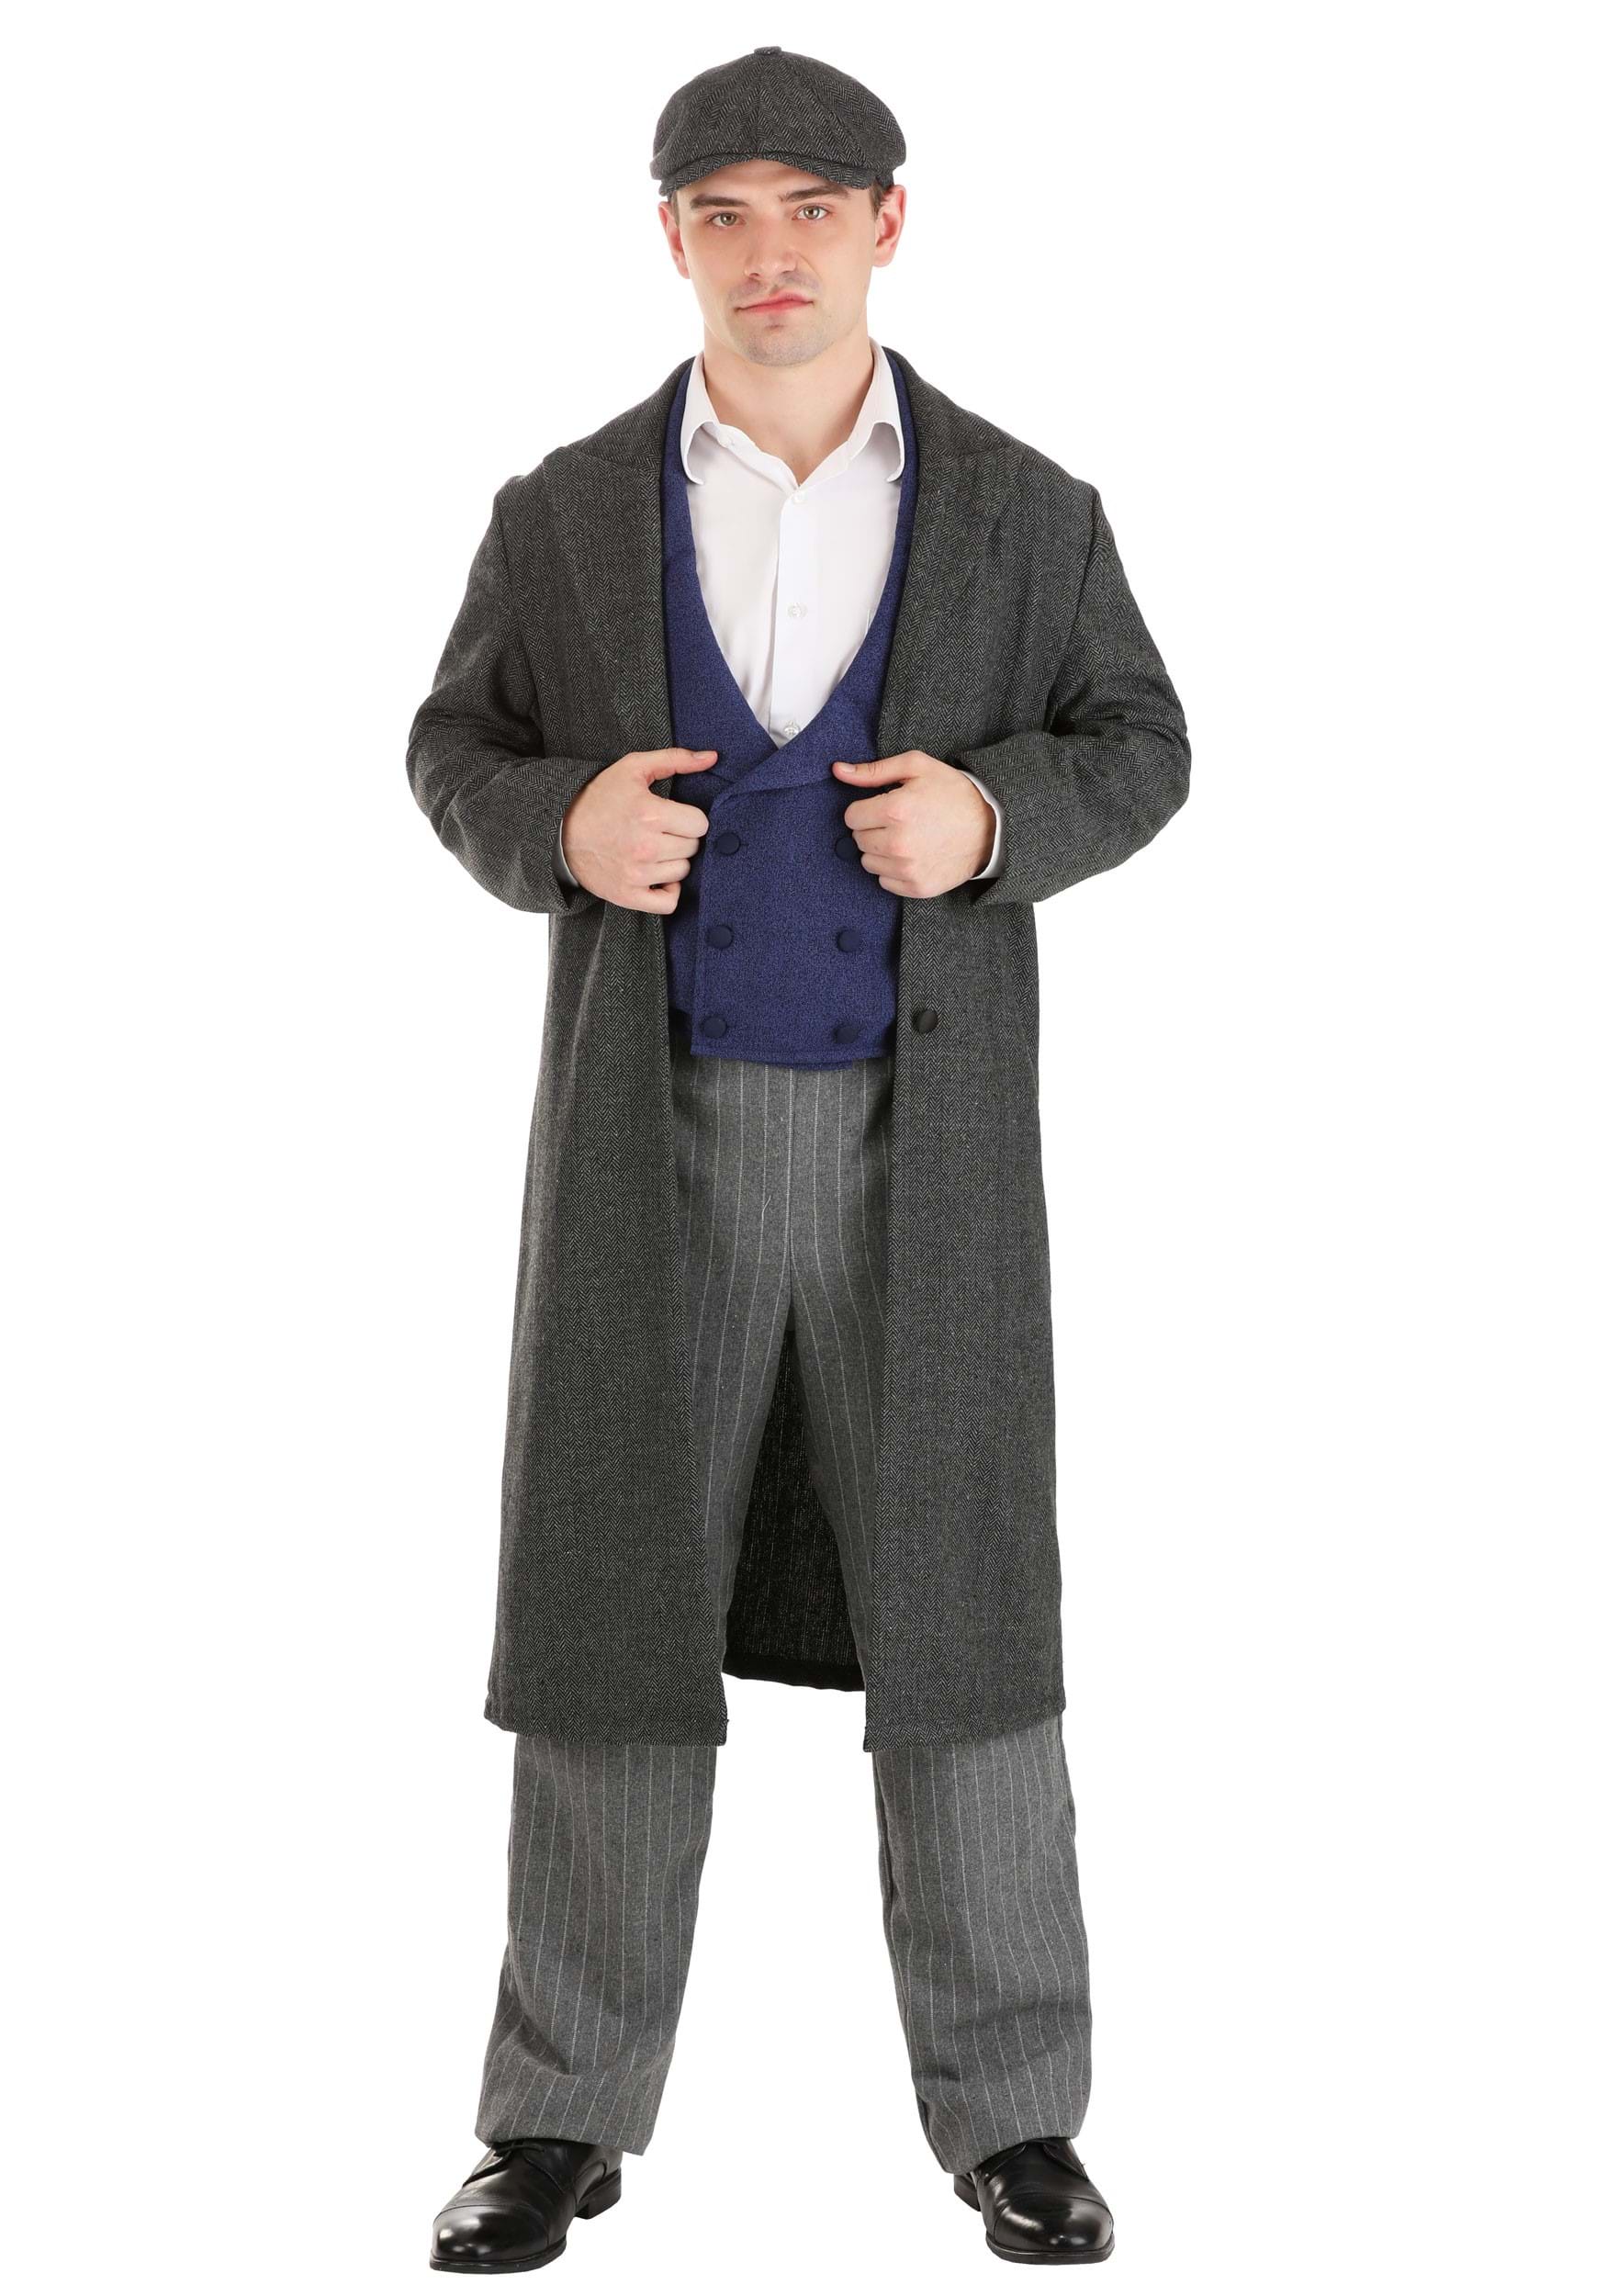 Image of Adult Deluxe Gangster Costume | Roaring '20s / Gangster Costumes ID FUN5793AD-XL